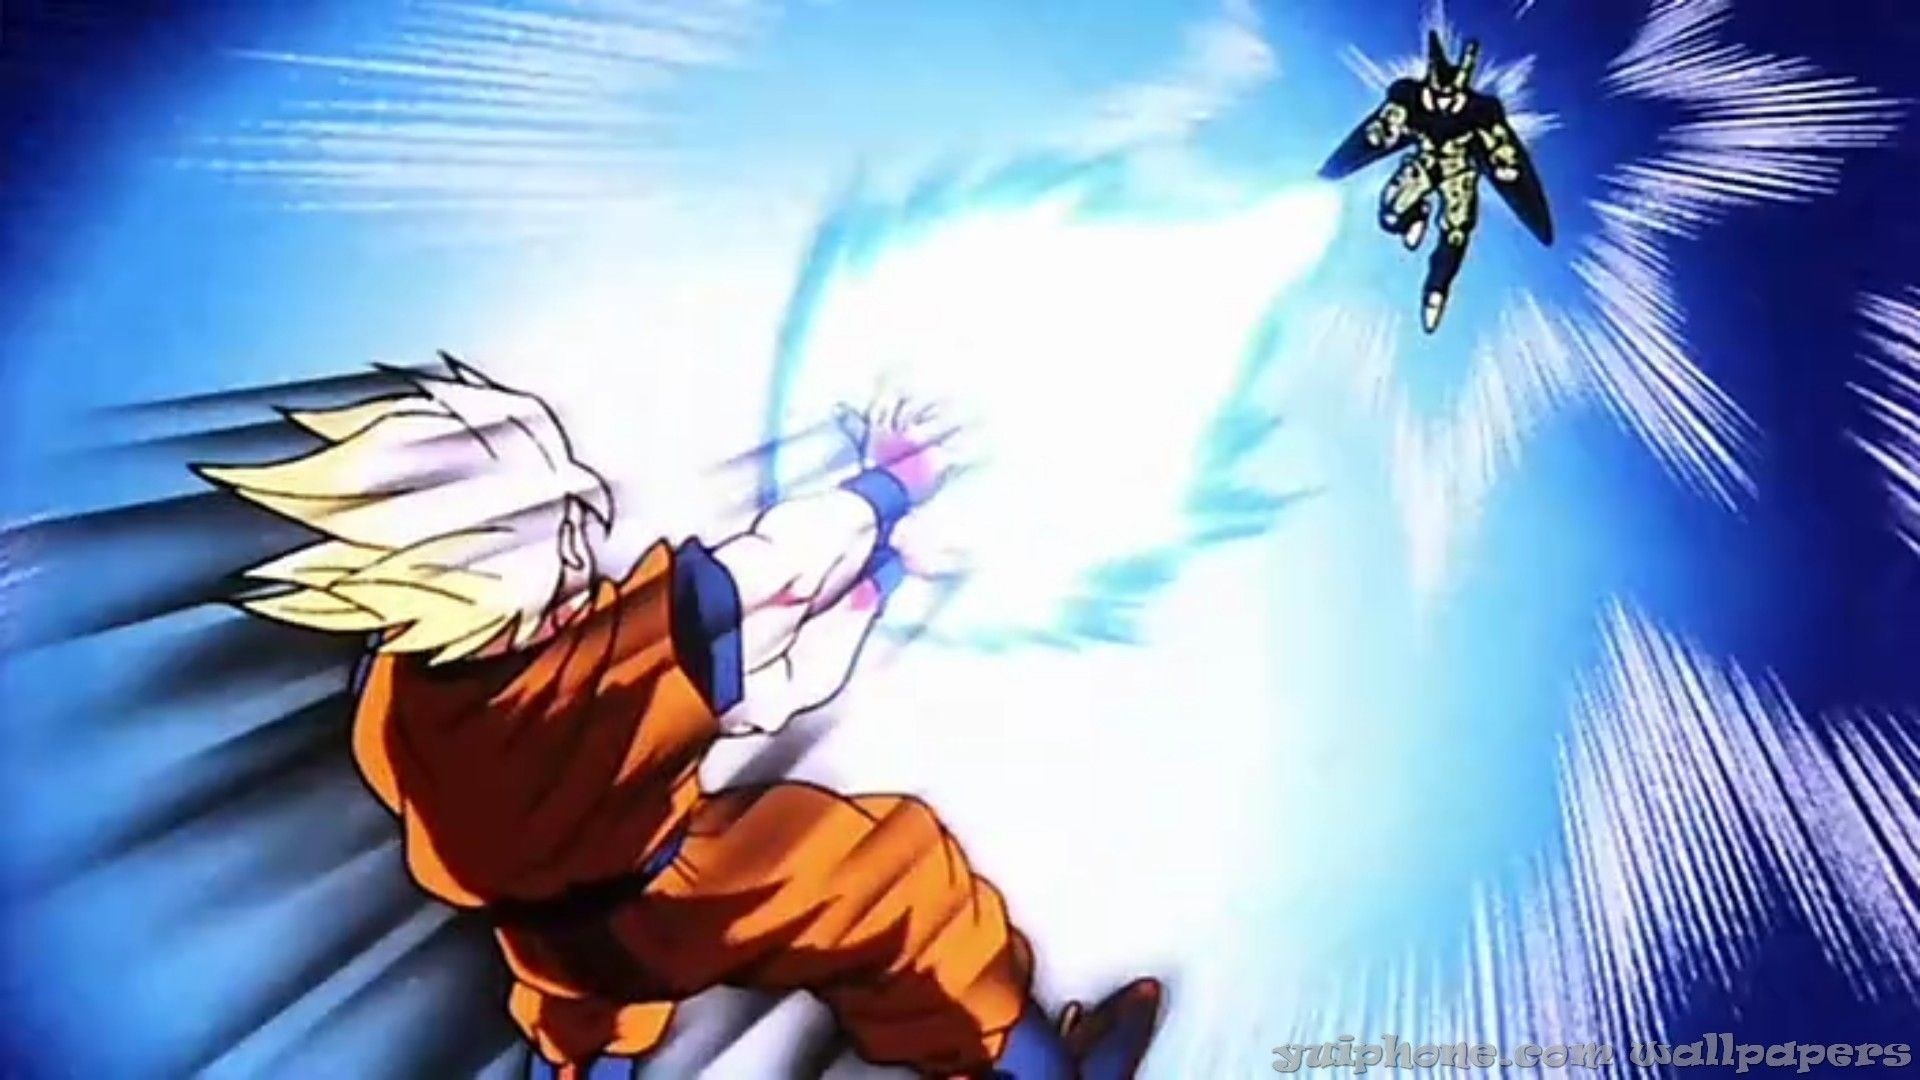 Dragon Ball Z Live Wallpapers 67 Images - Goku Kamehameha On Someone , HD Wallpaper & Backgrounds